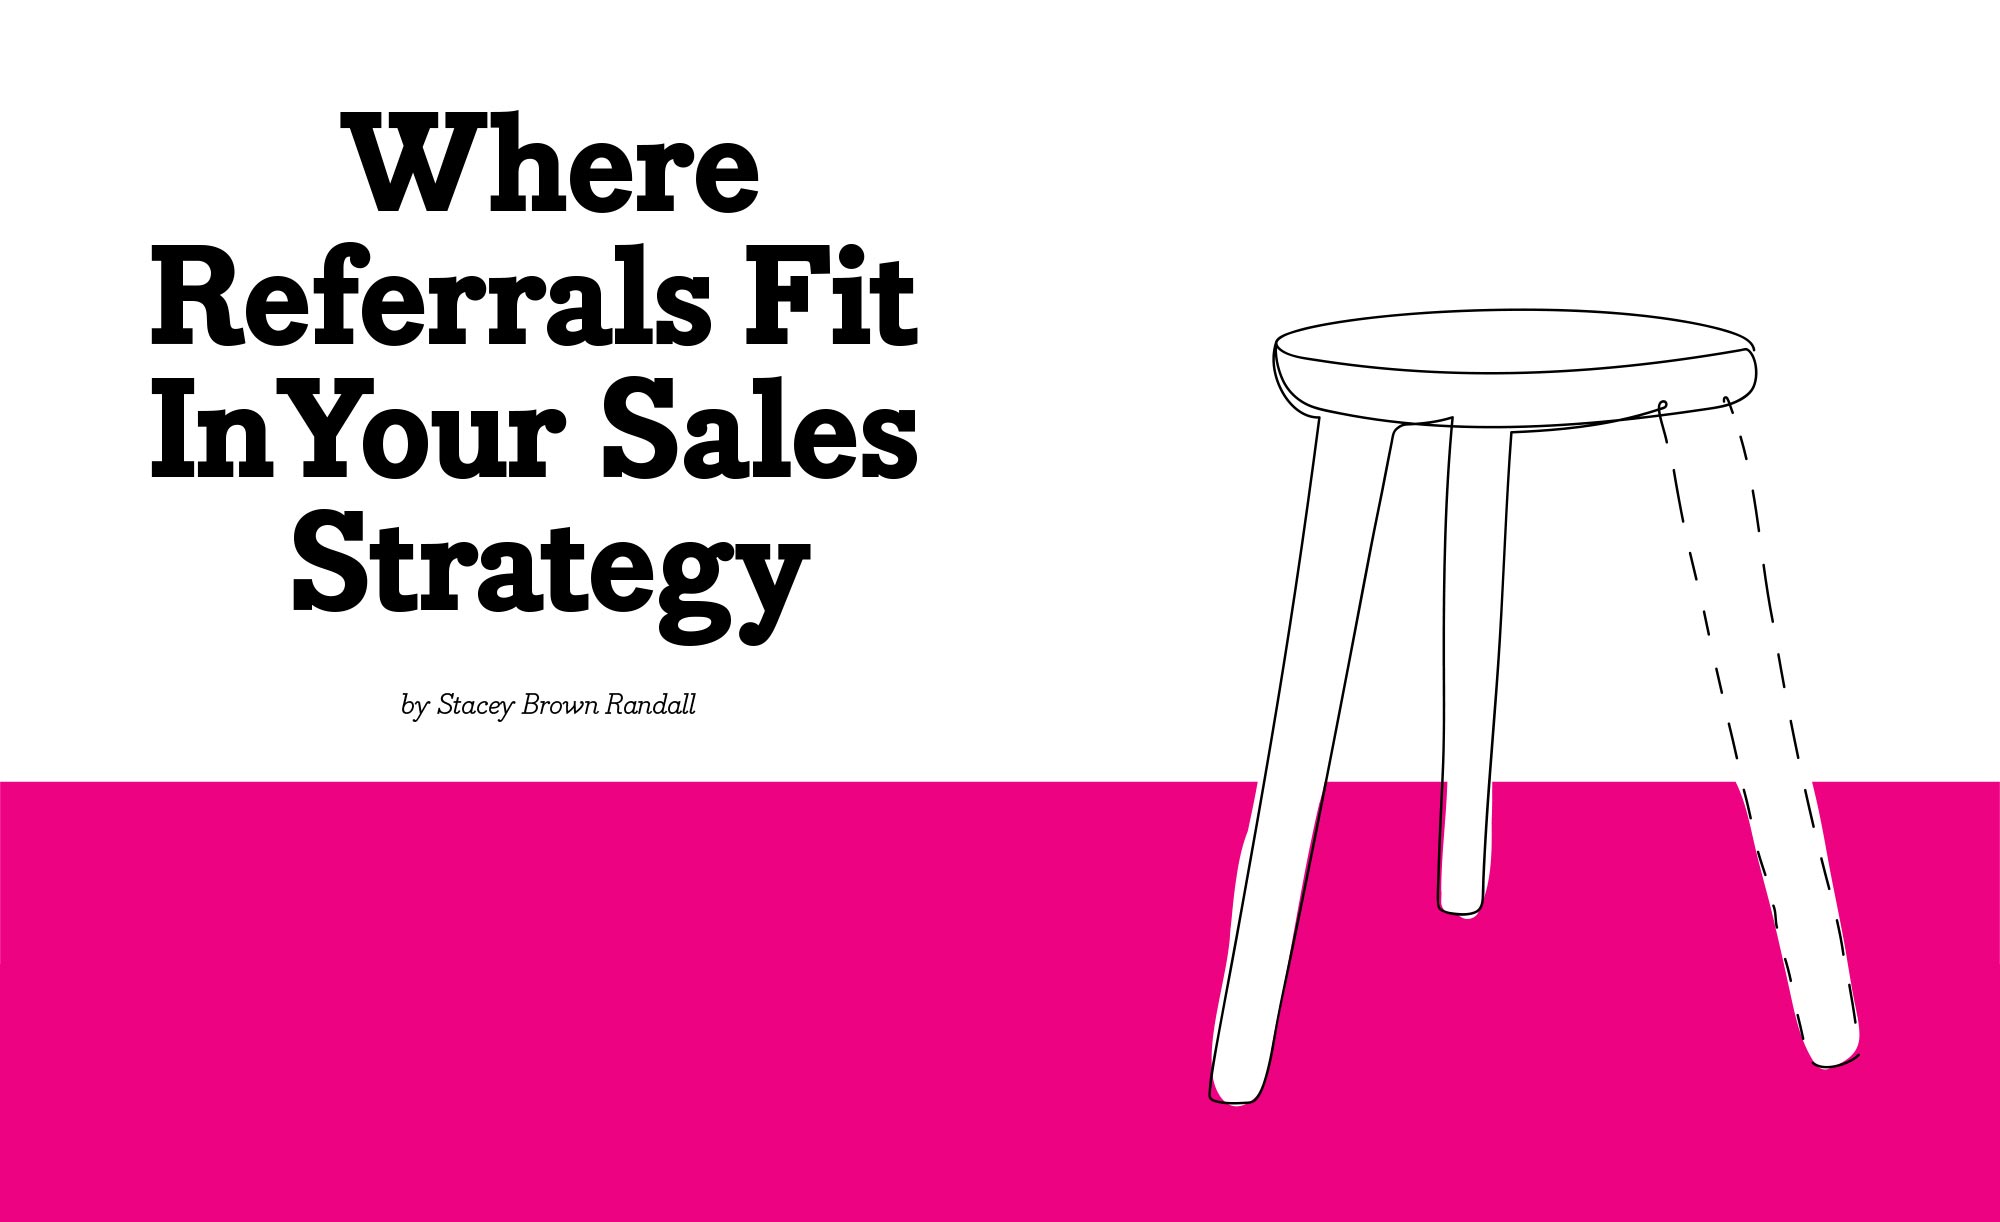 Where Referrals Fit In Your Sales Strategy